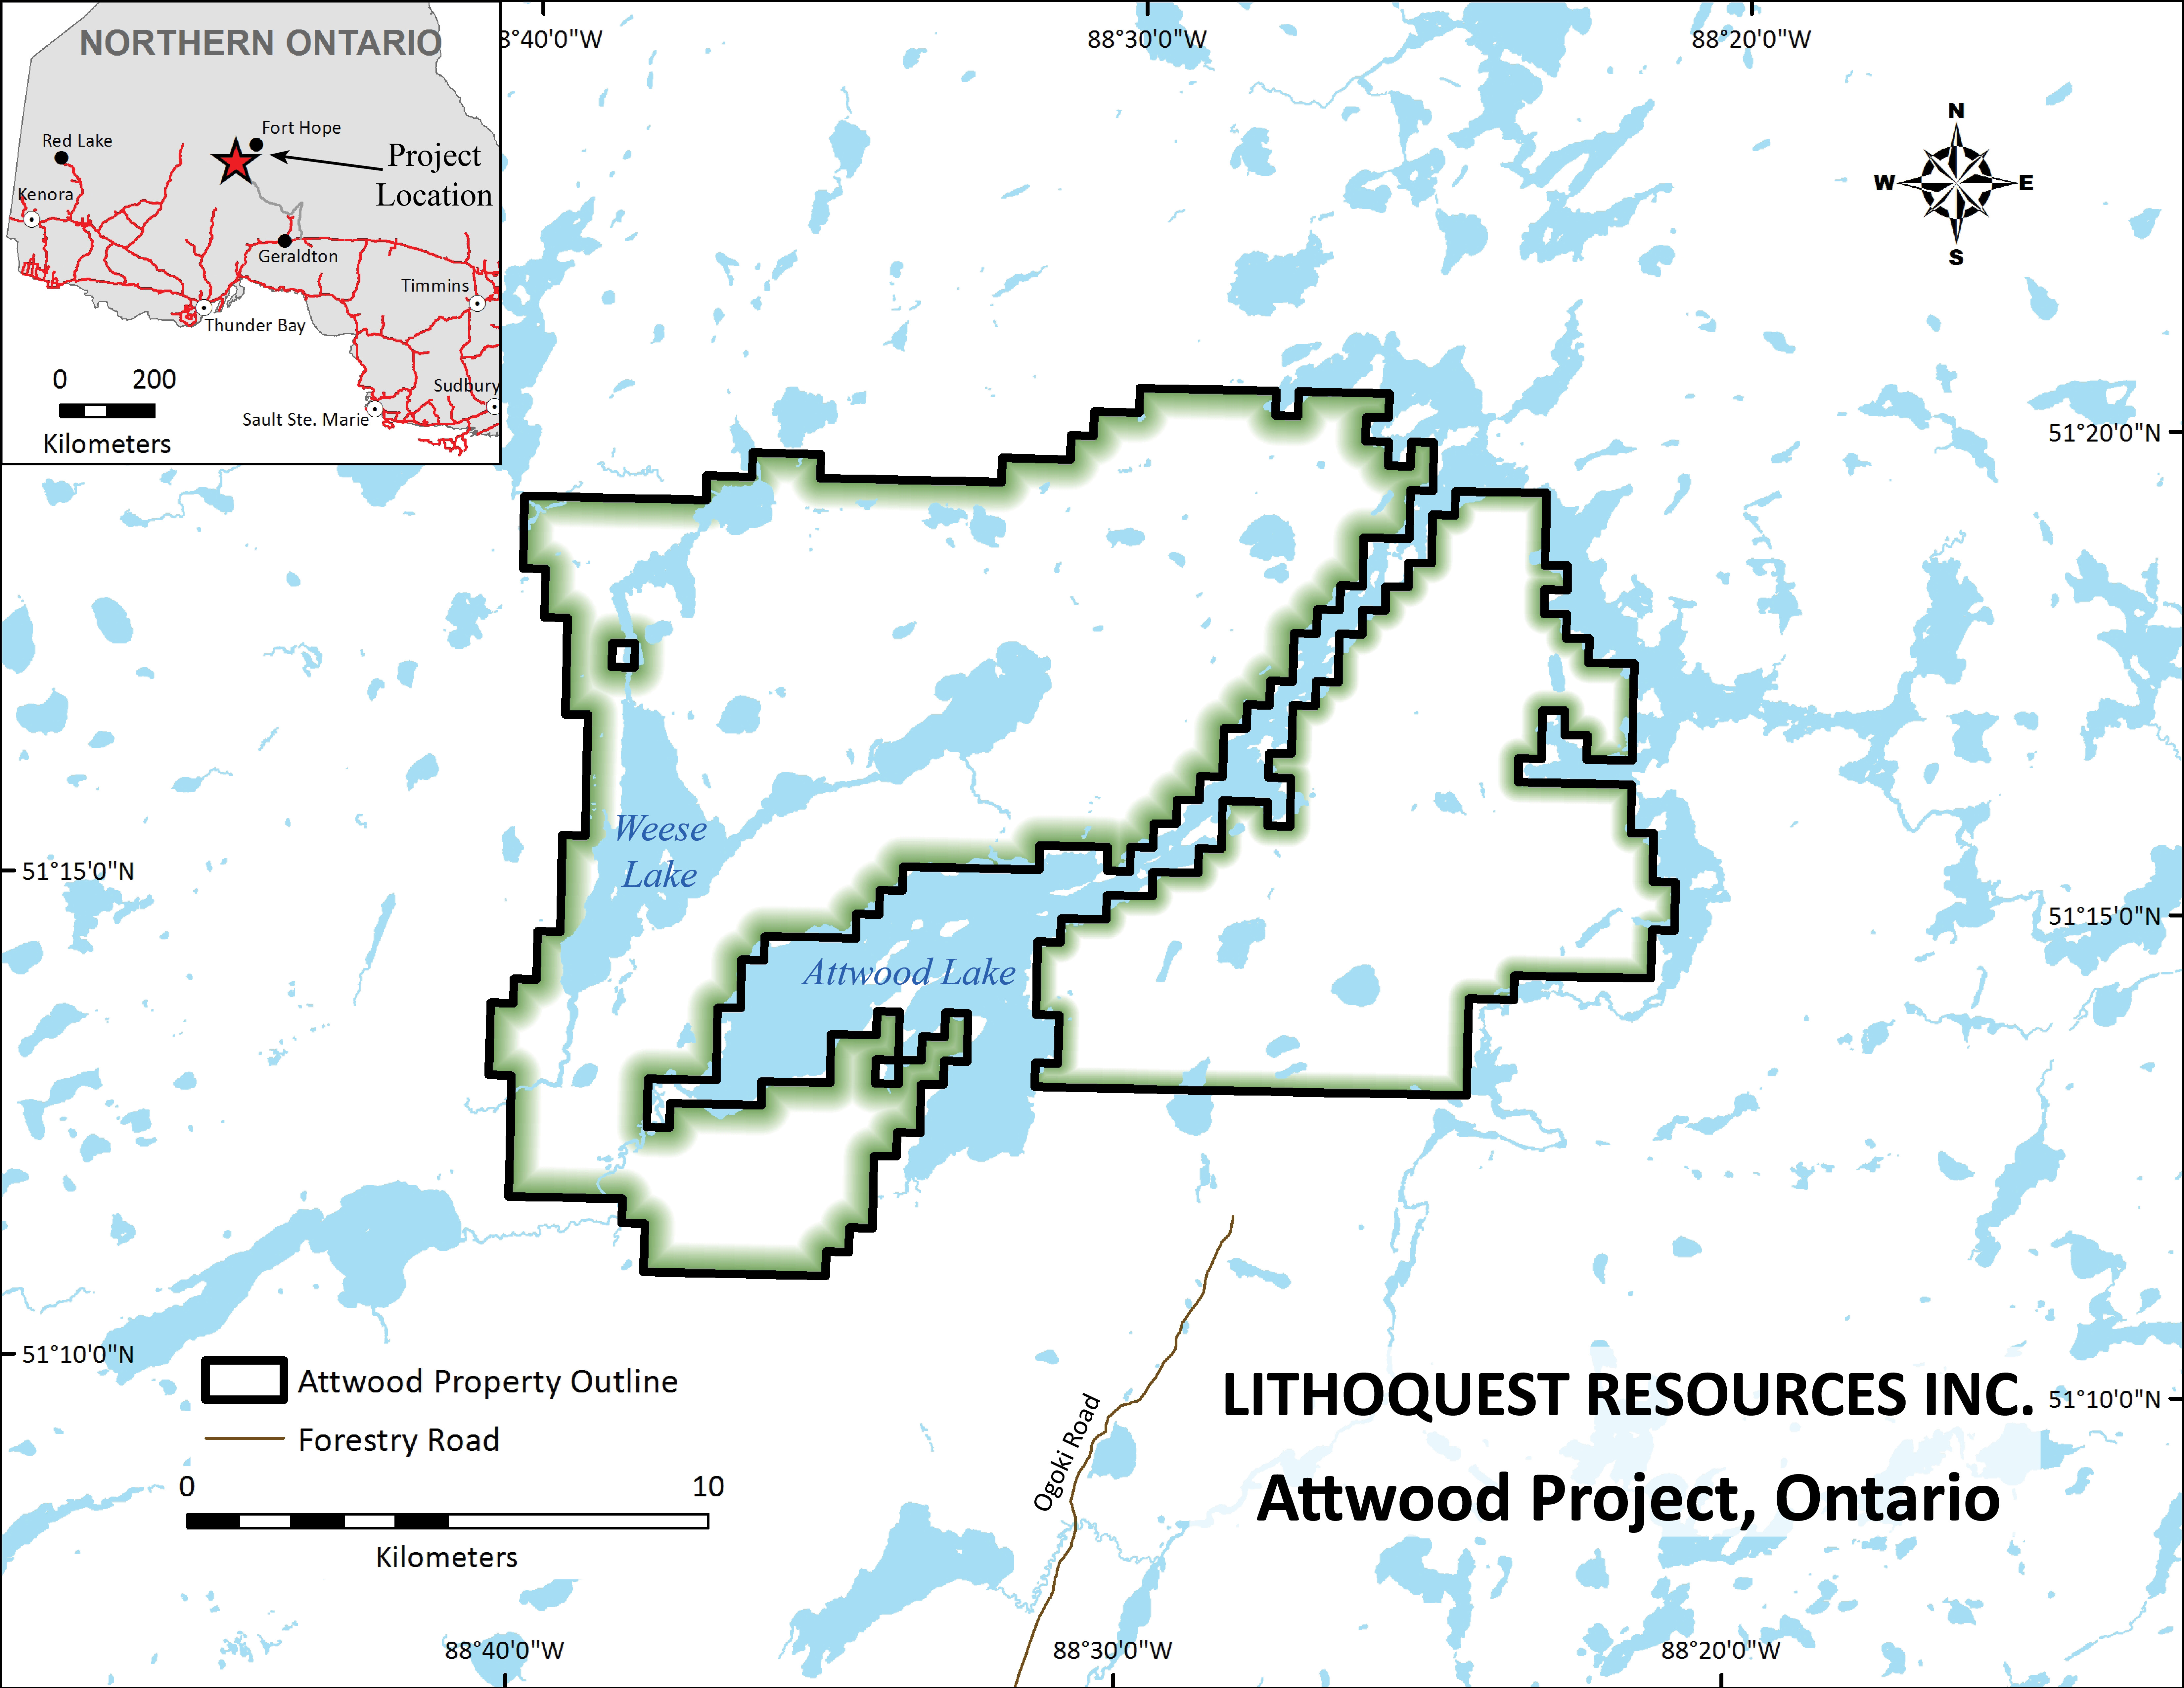 Lithoquest Resources Inc., Tuesday, December 22, 2020, Press release picture